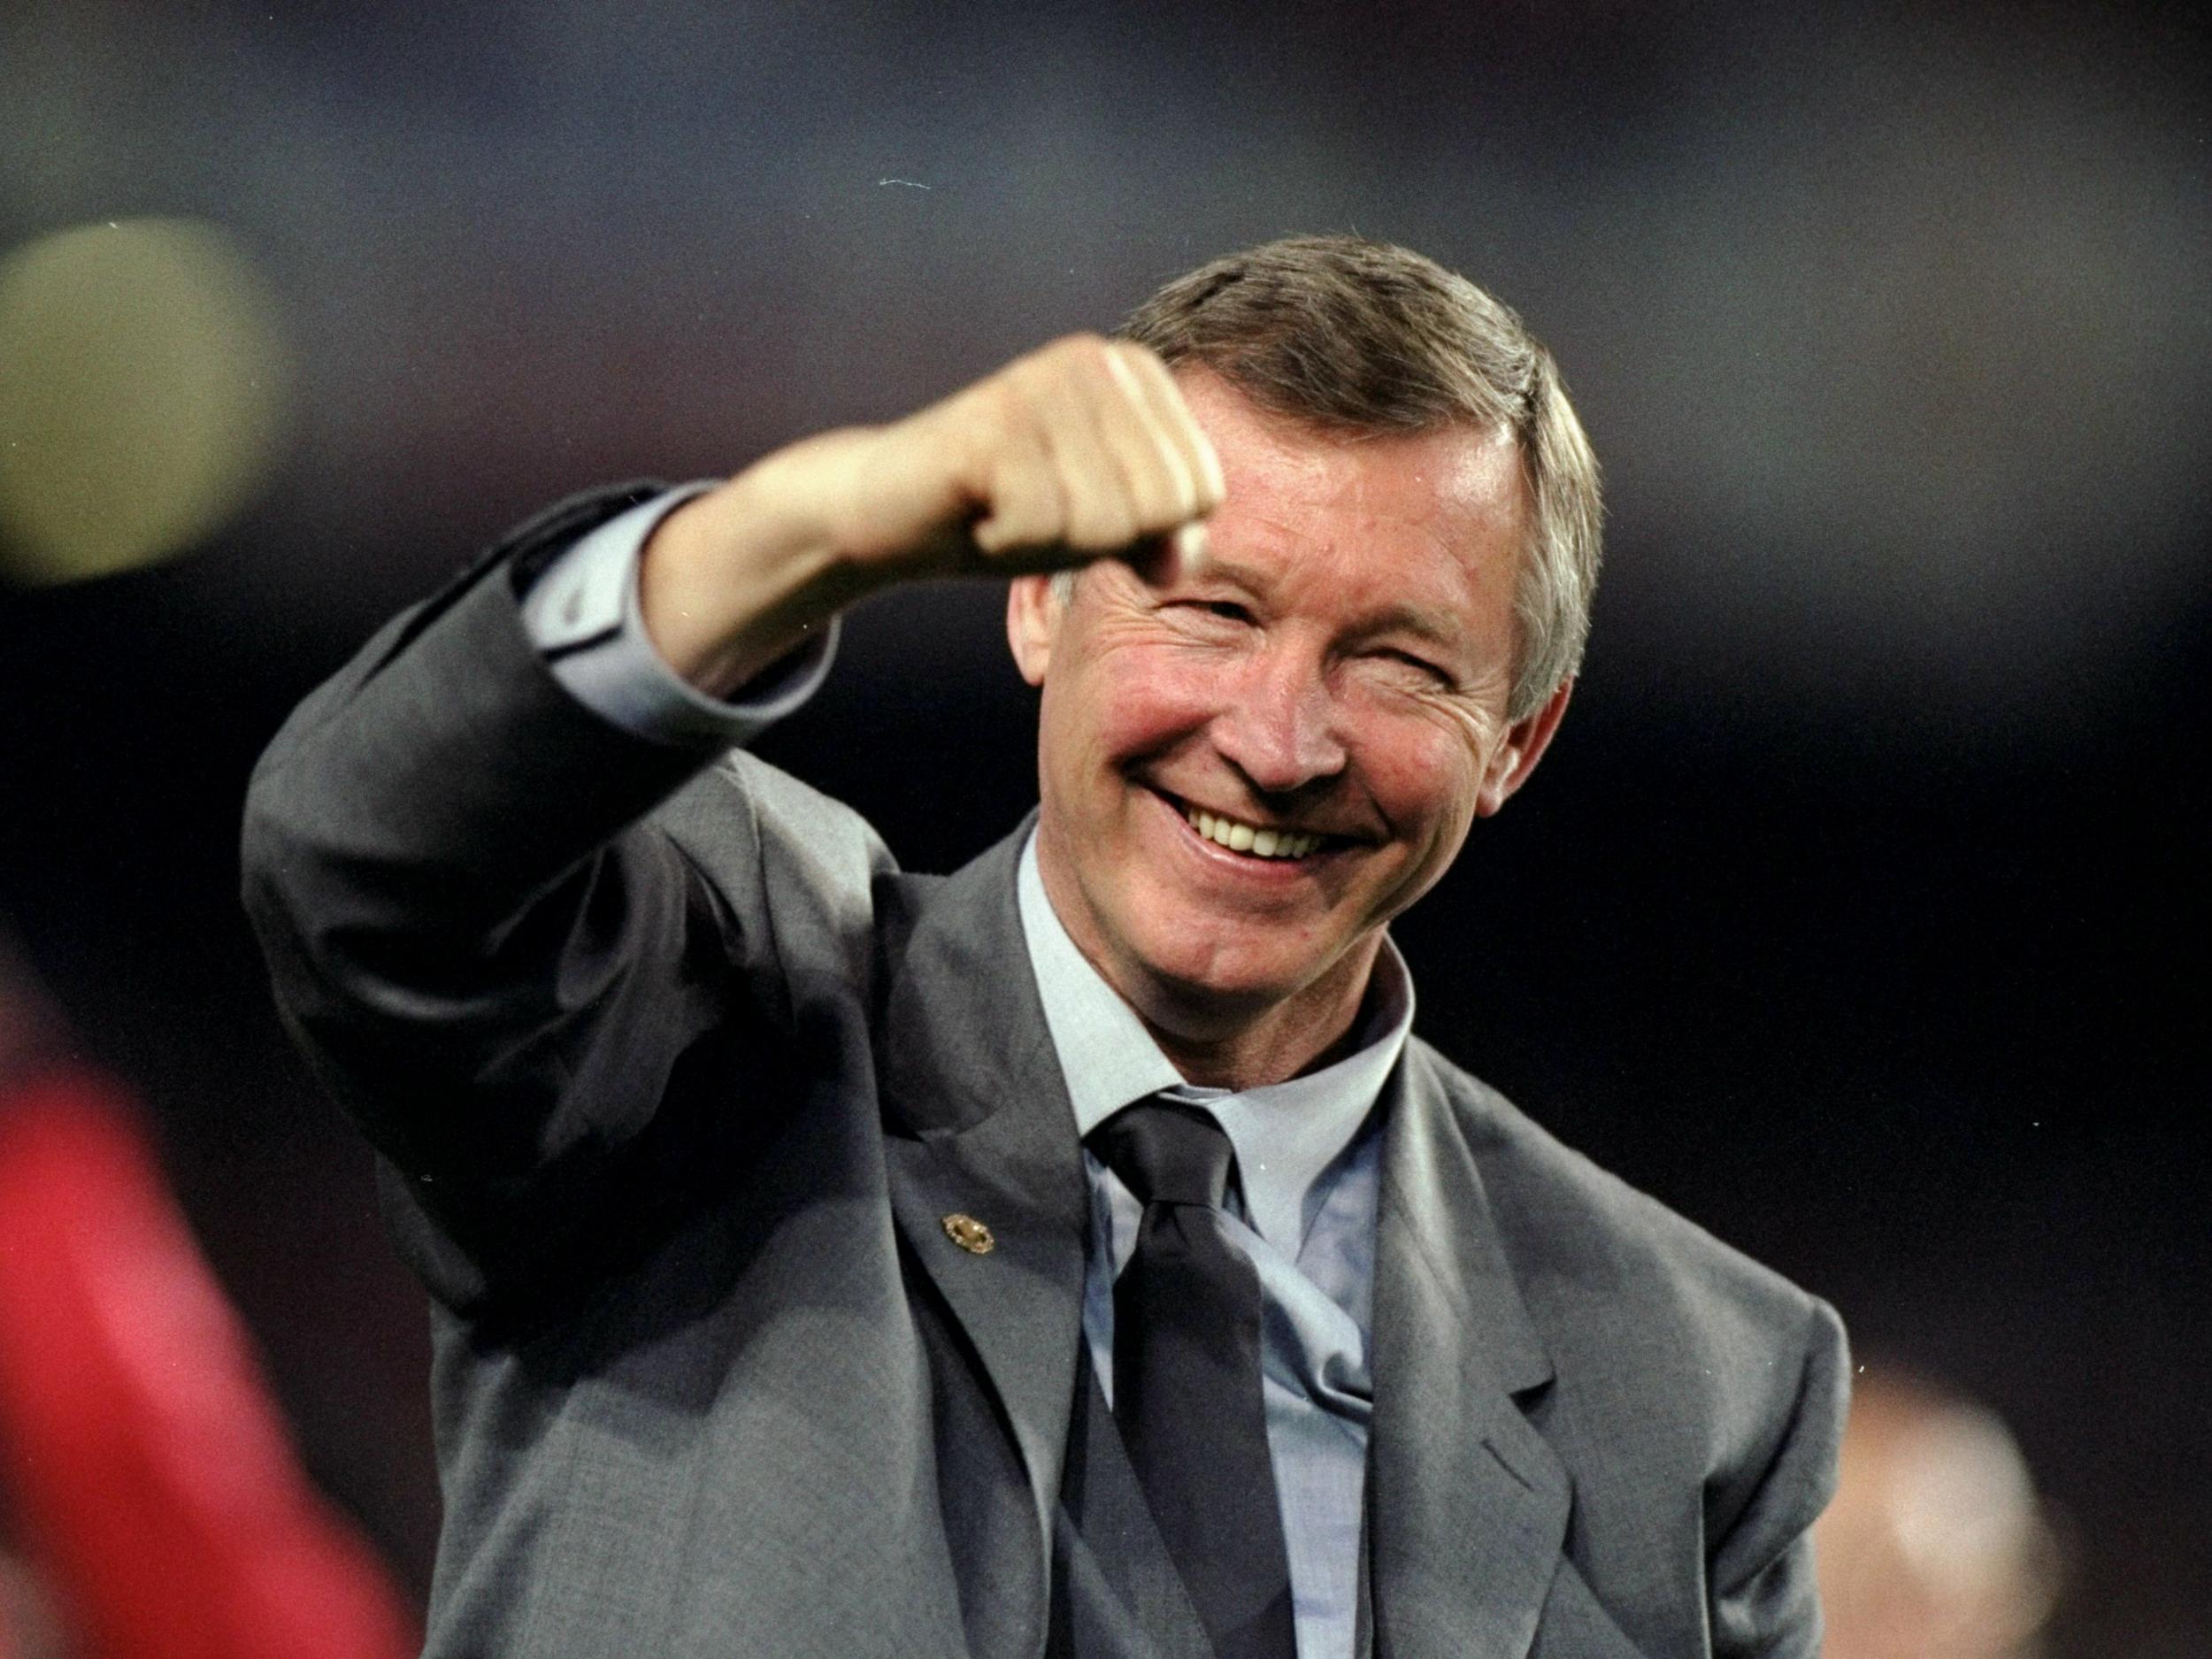 Sir Alex Ferguson punches the air as Manchester United come from behind to defeat Bayern Munich 2-1 in stoppage time